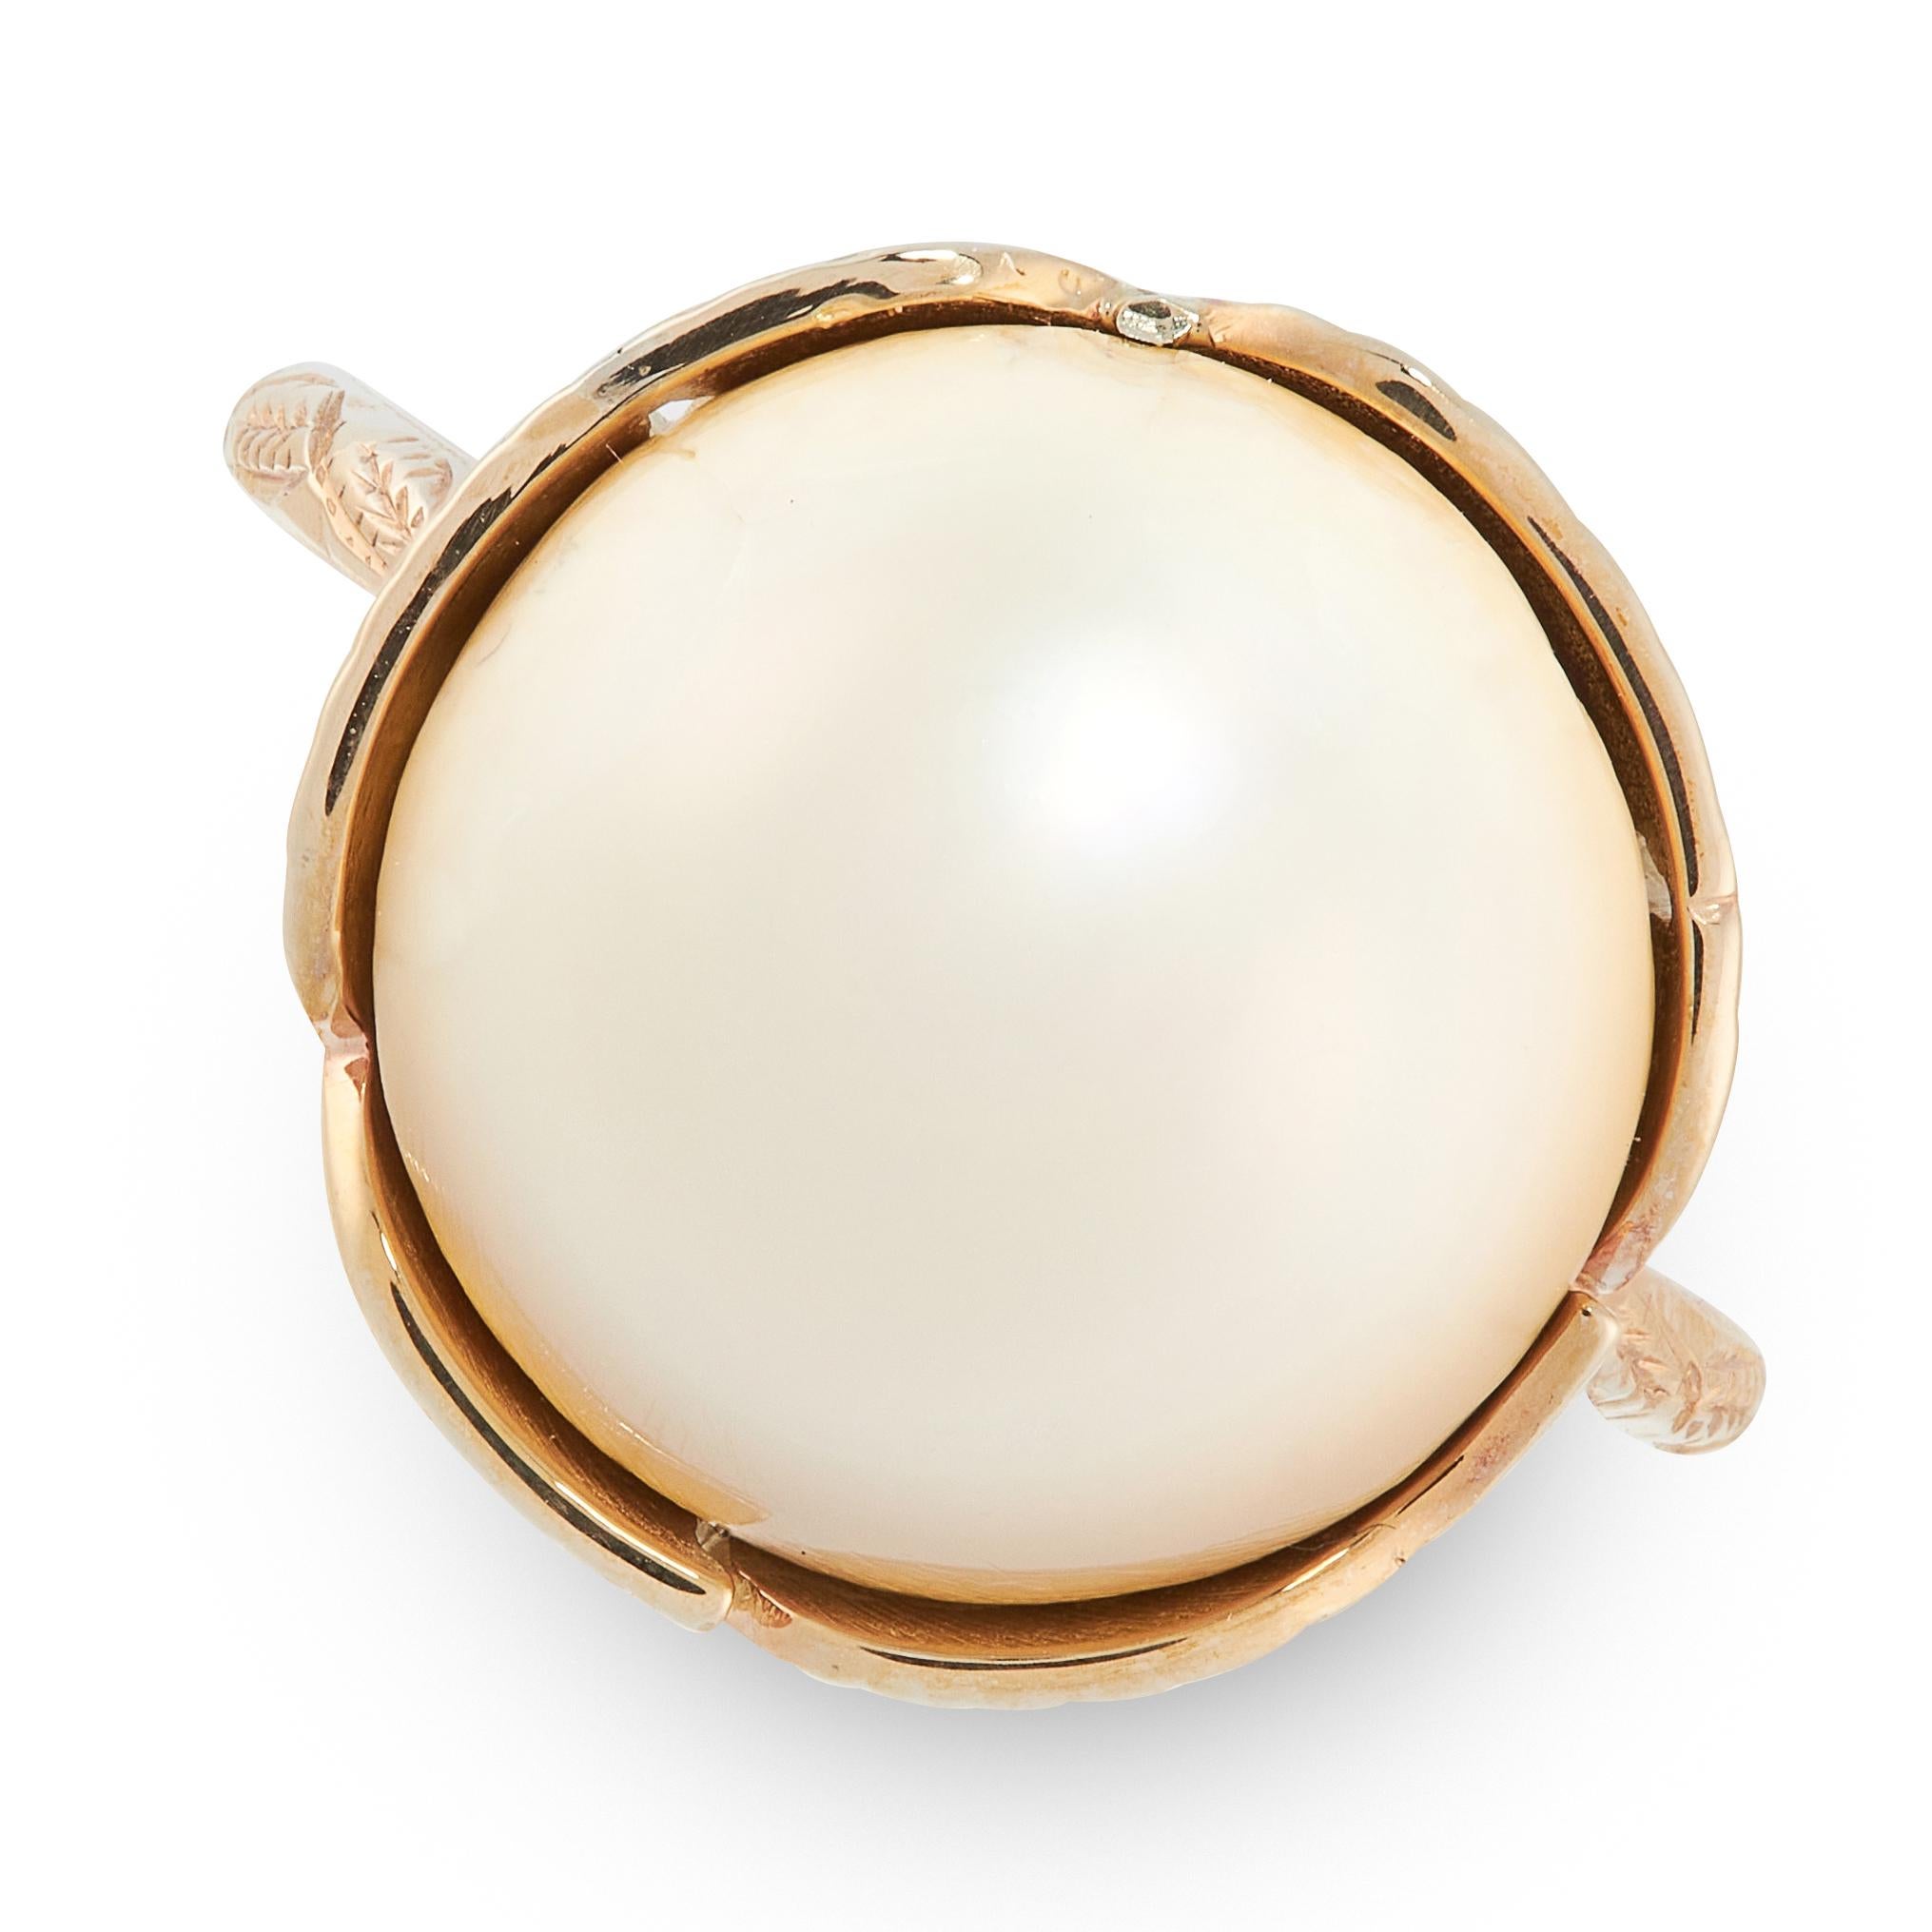 A NATURAL PEARL DRESS RING in yellow gold, set with a circular natural blister pearl of 13.81mm,